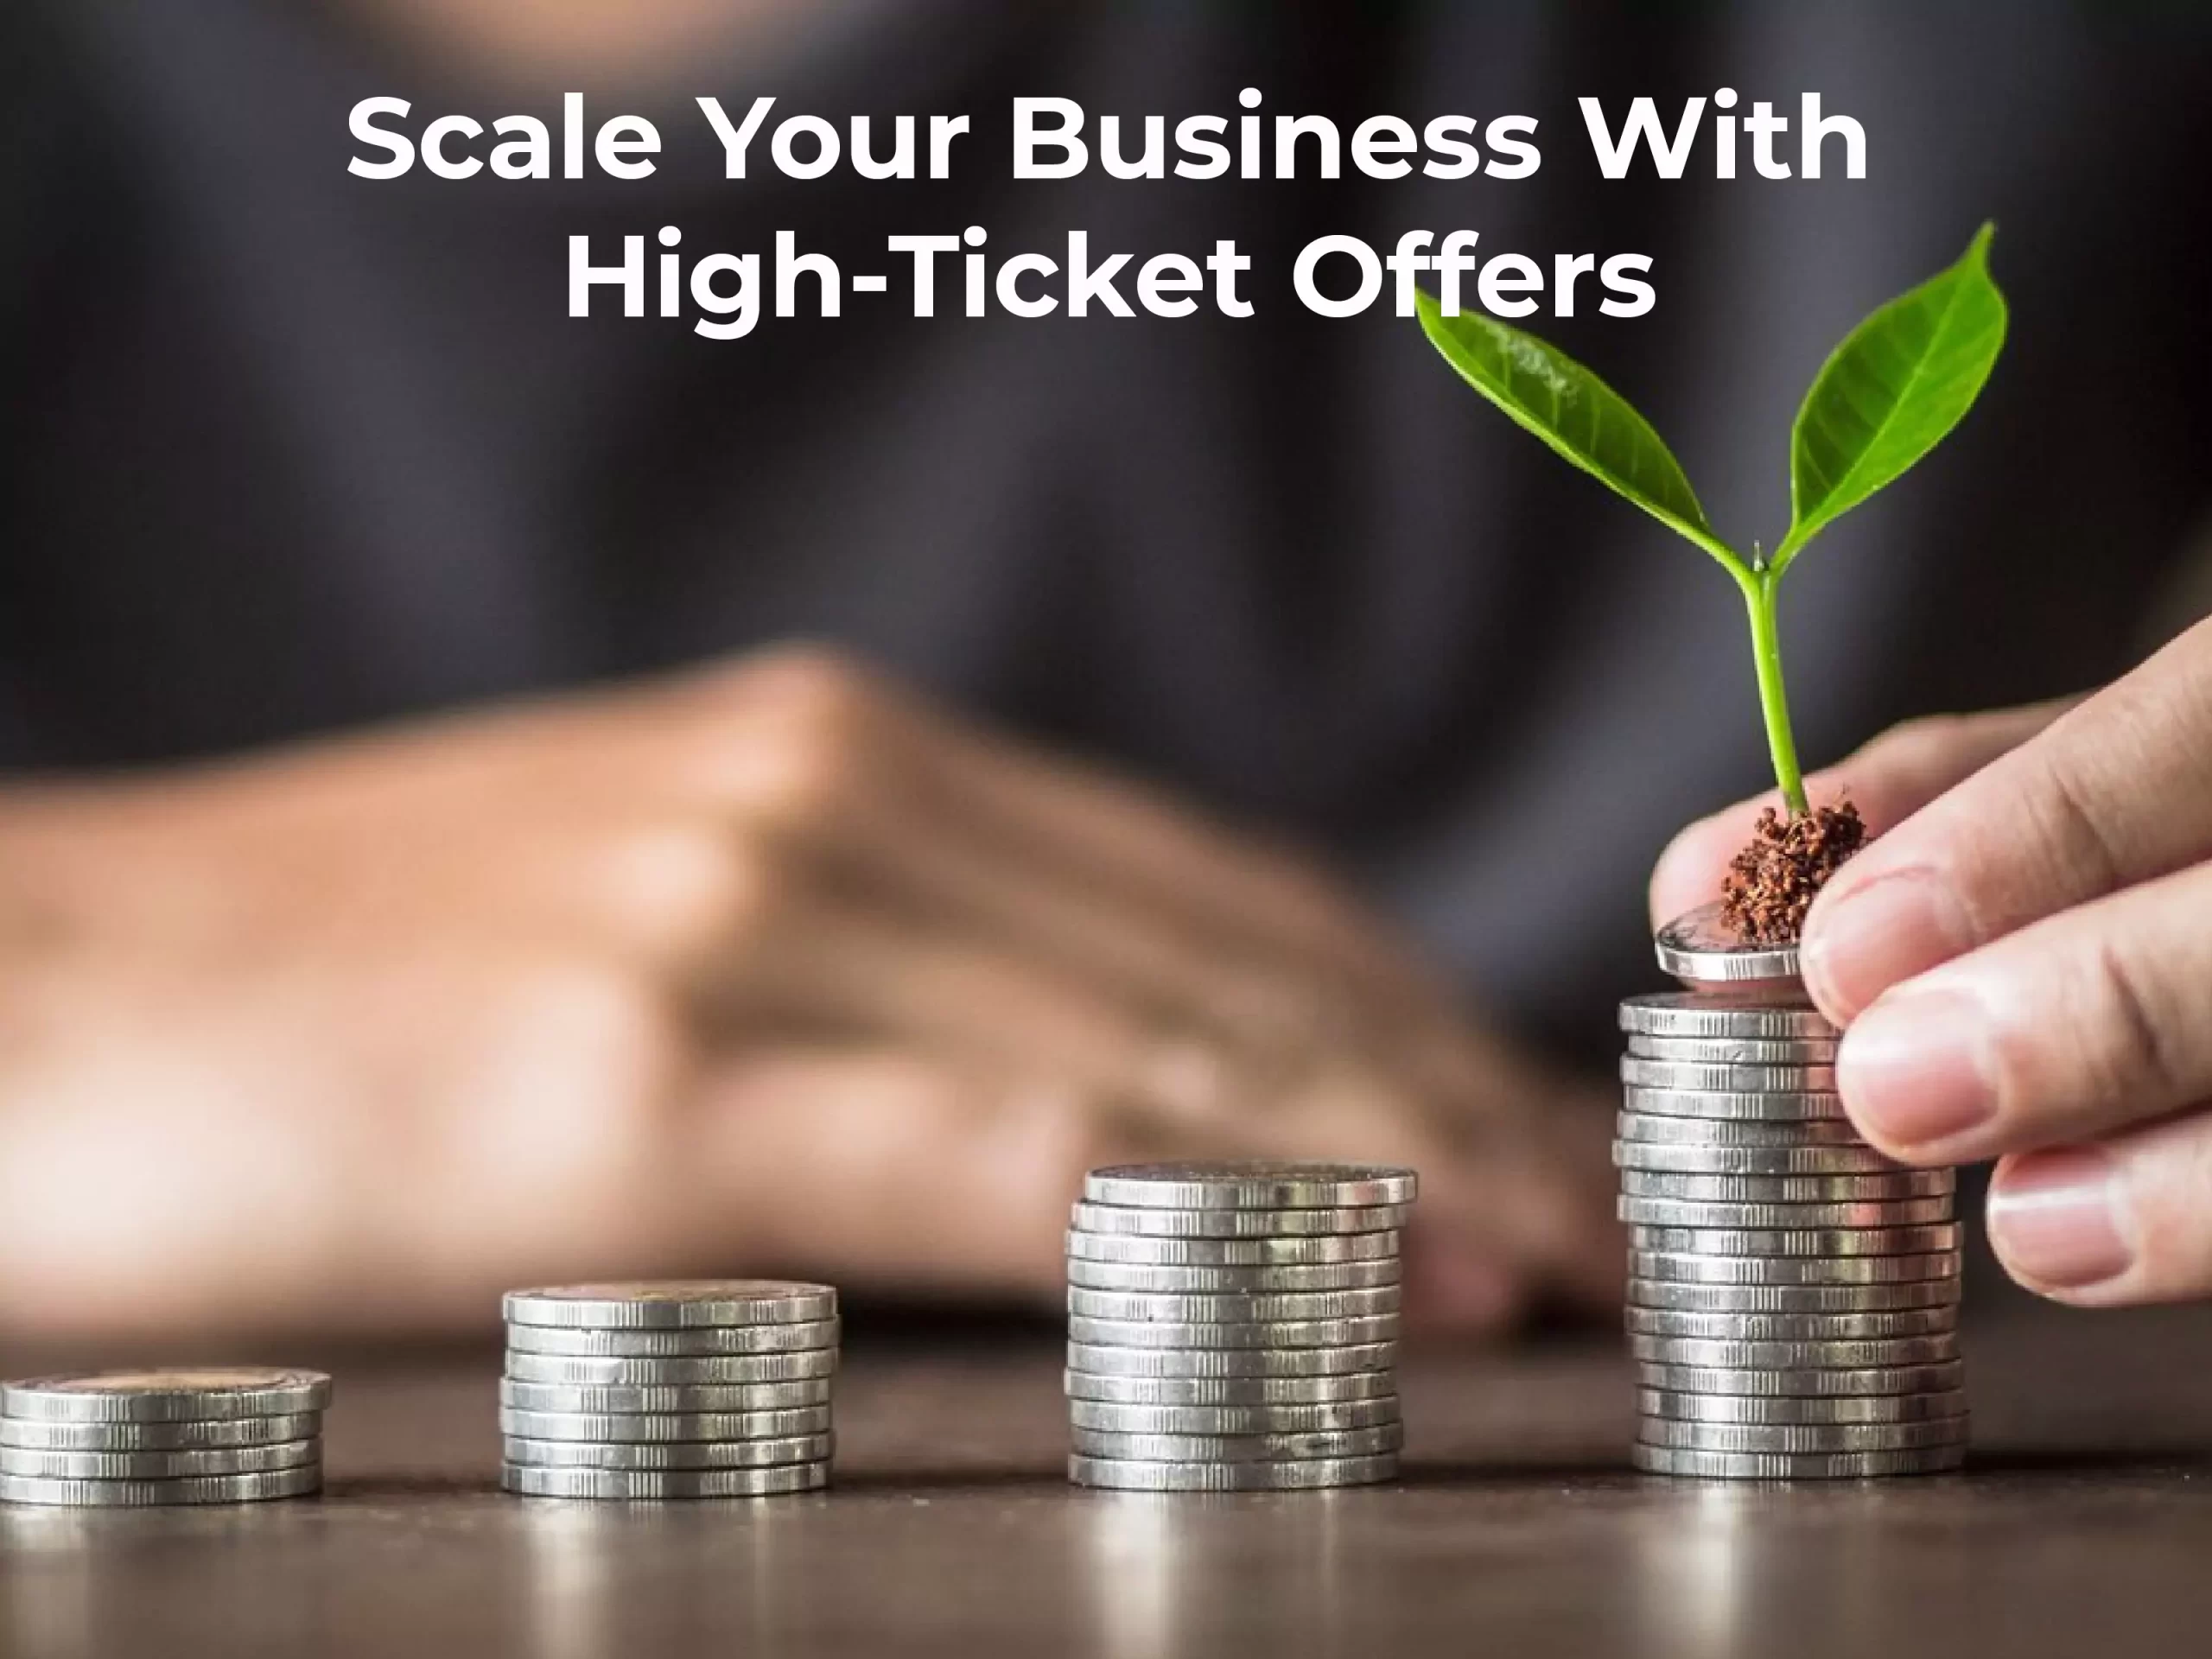 Scale Your Business With High-Ticket Offers